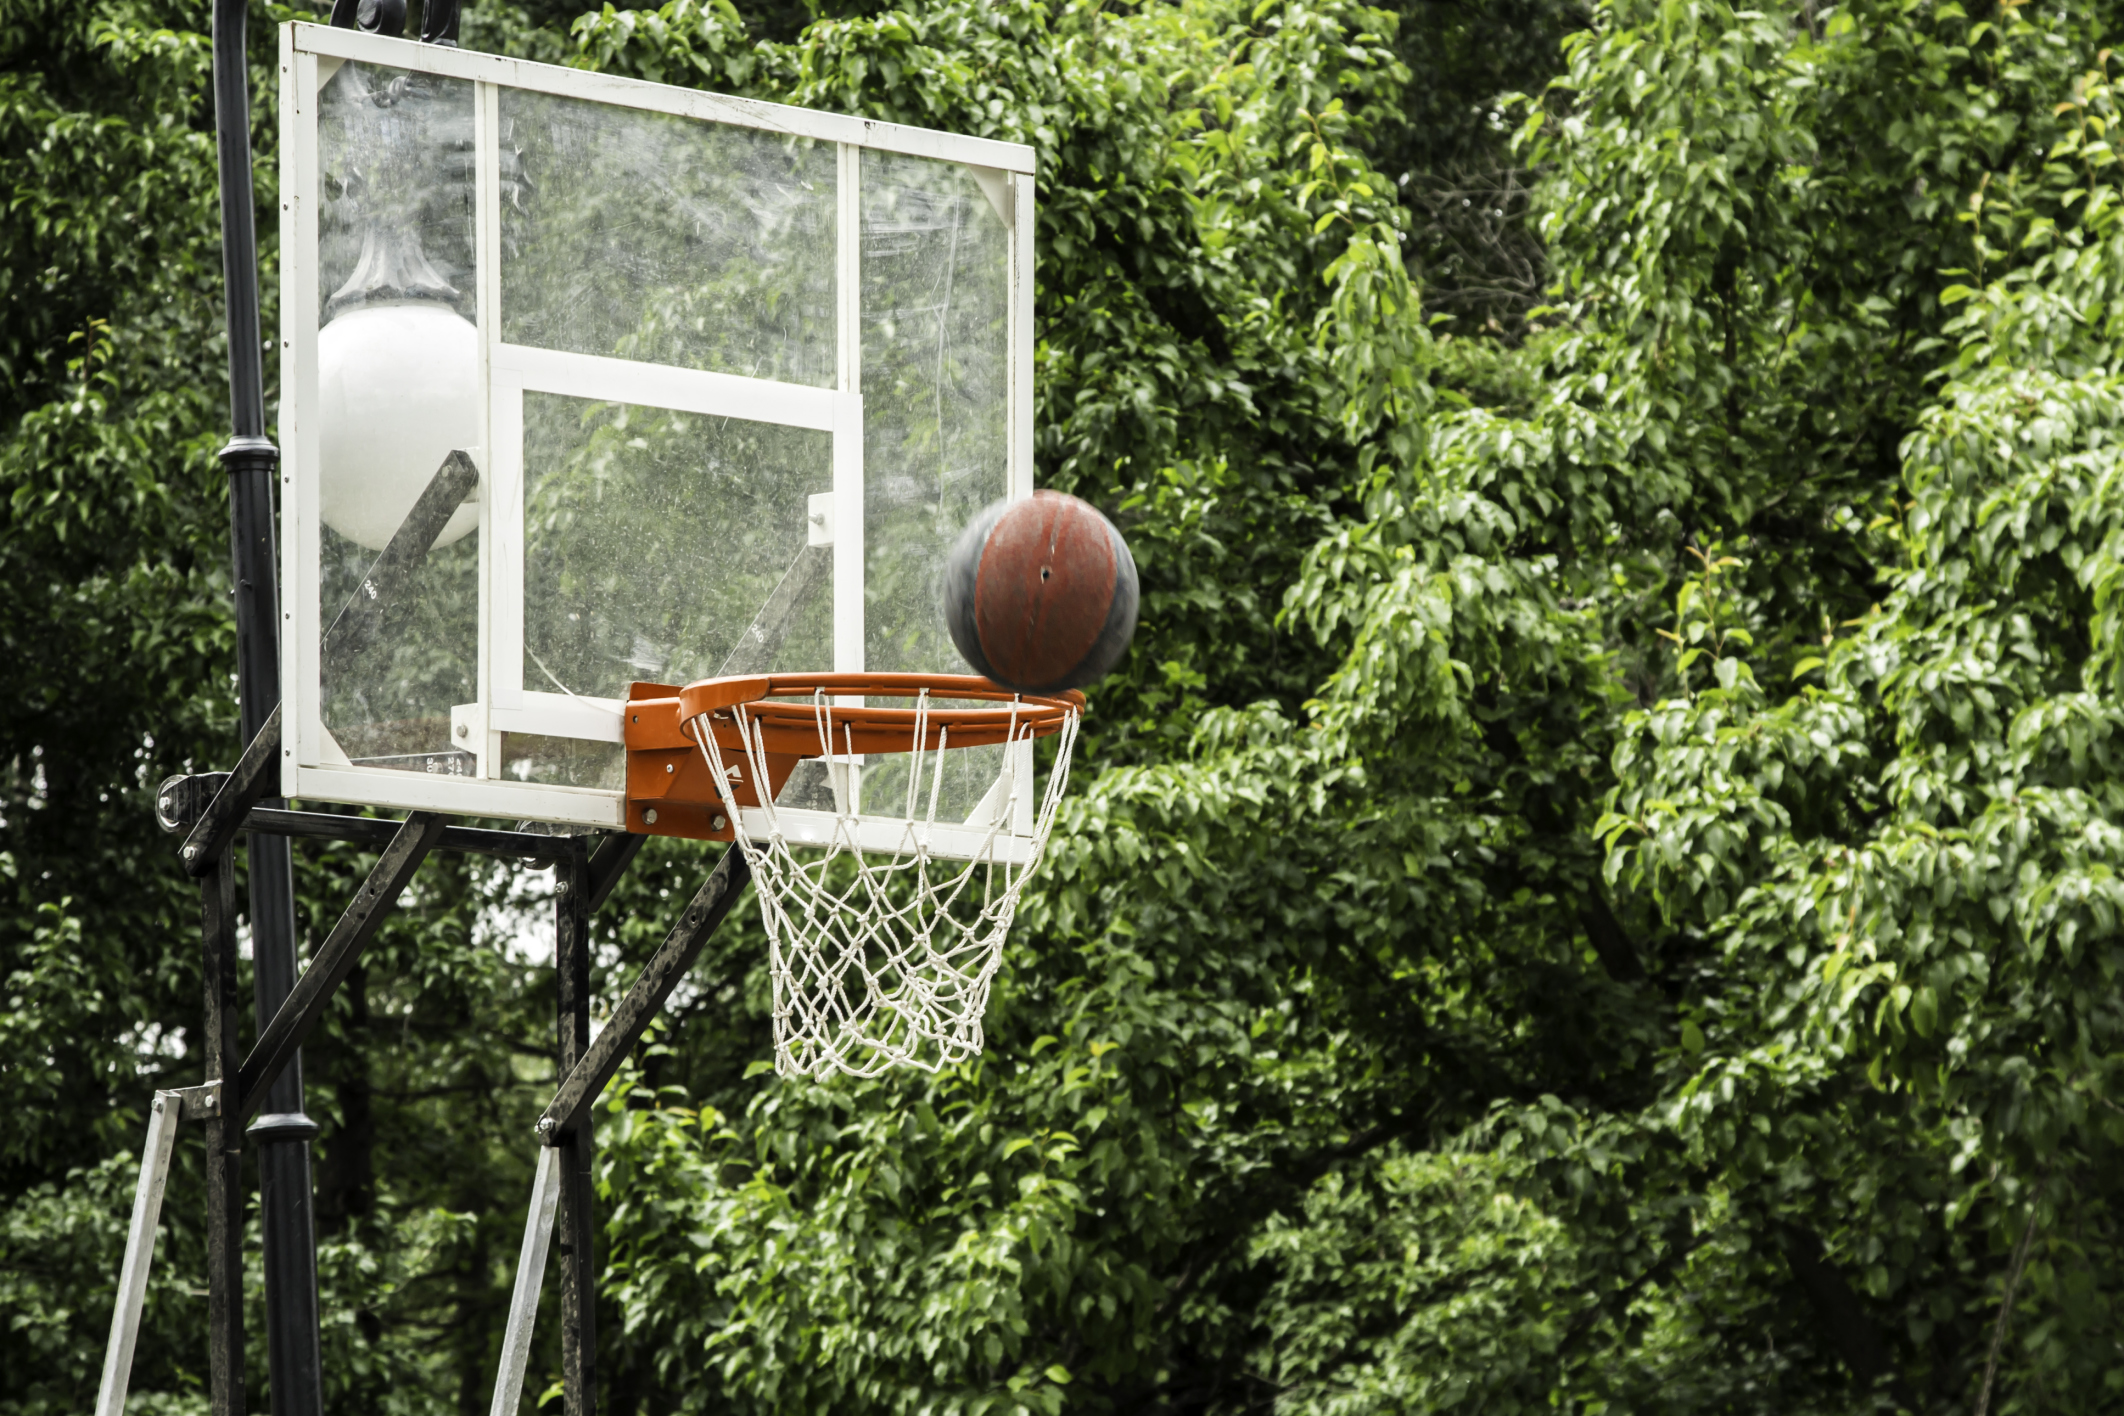 10 Best Basketball Hoop Under $500 Reviews & Buying Guides